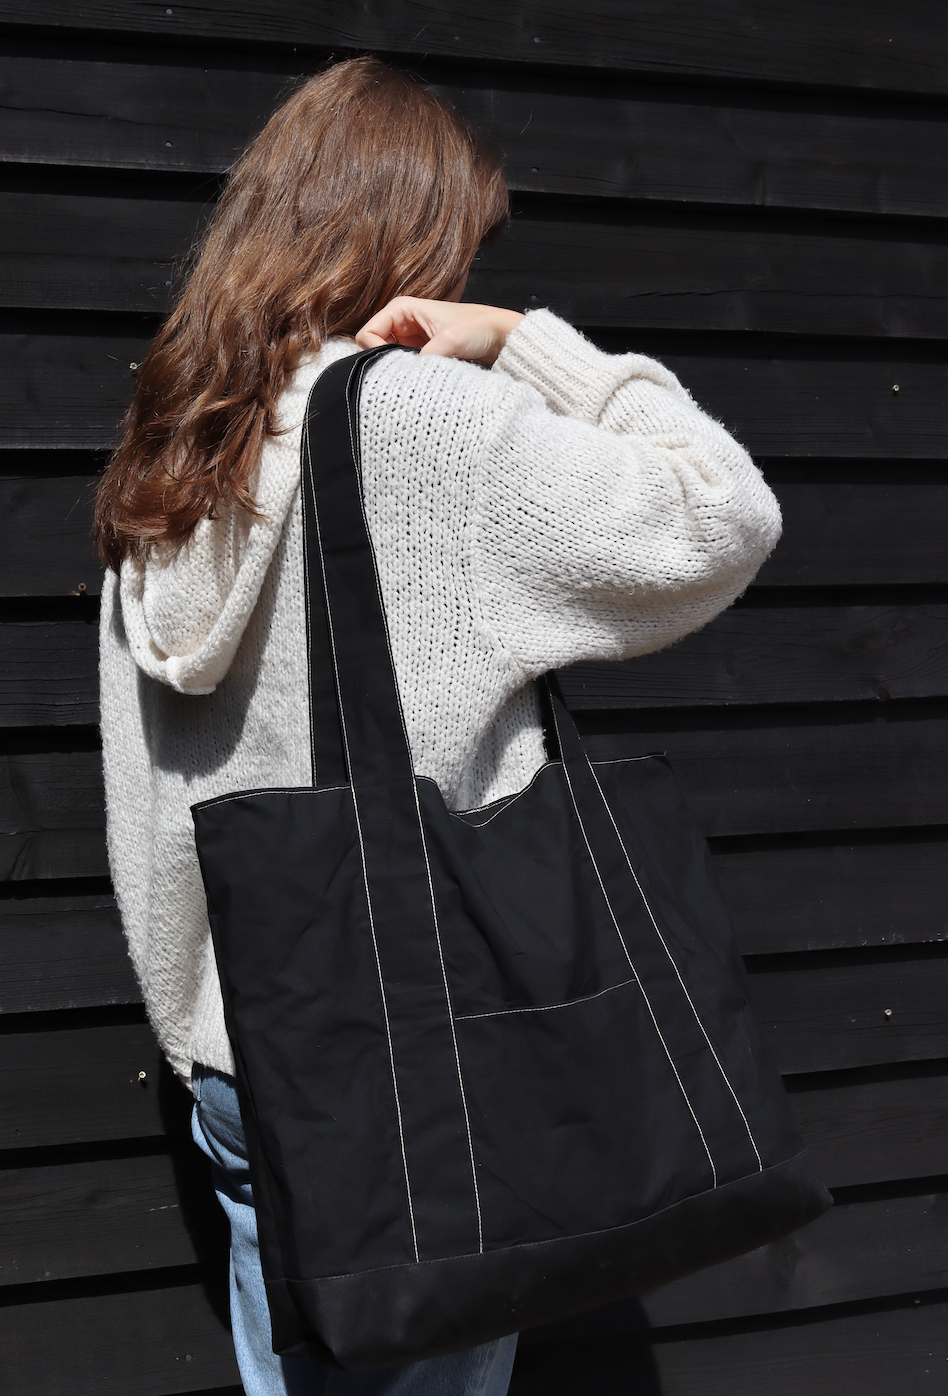 Black Dry Waxed Cotton - Big Tote